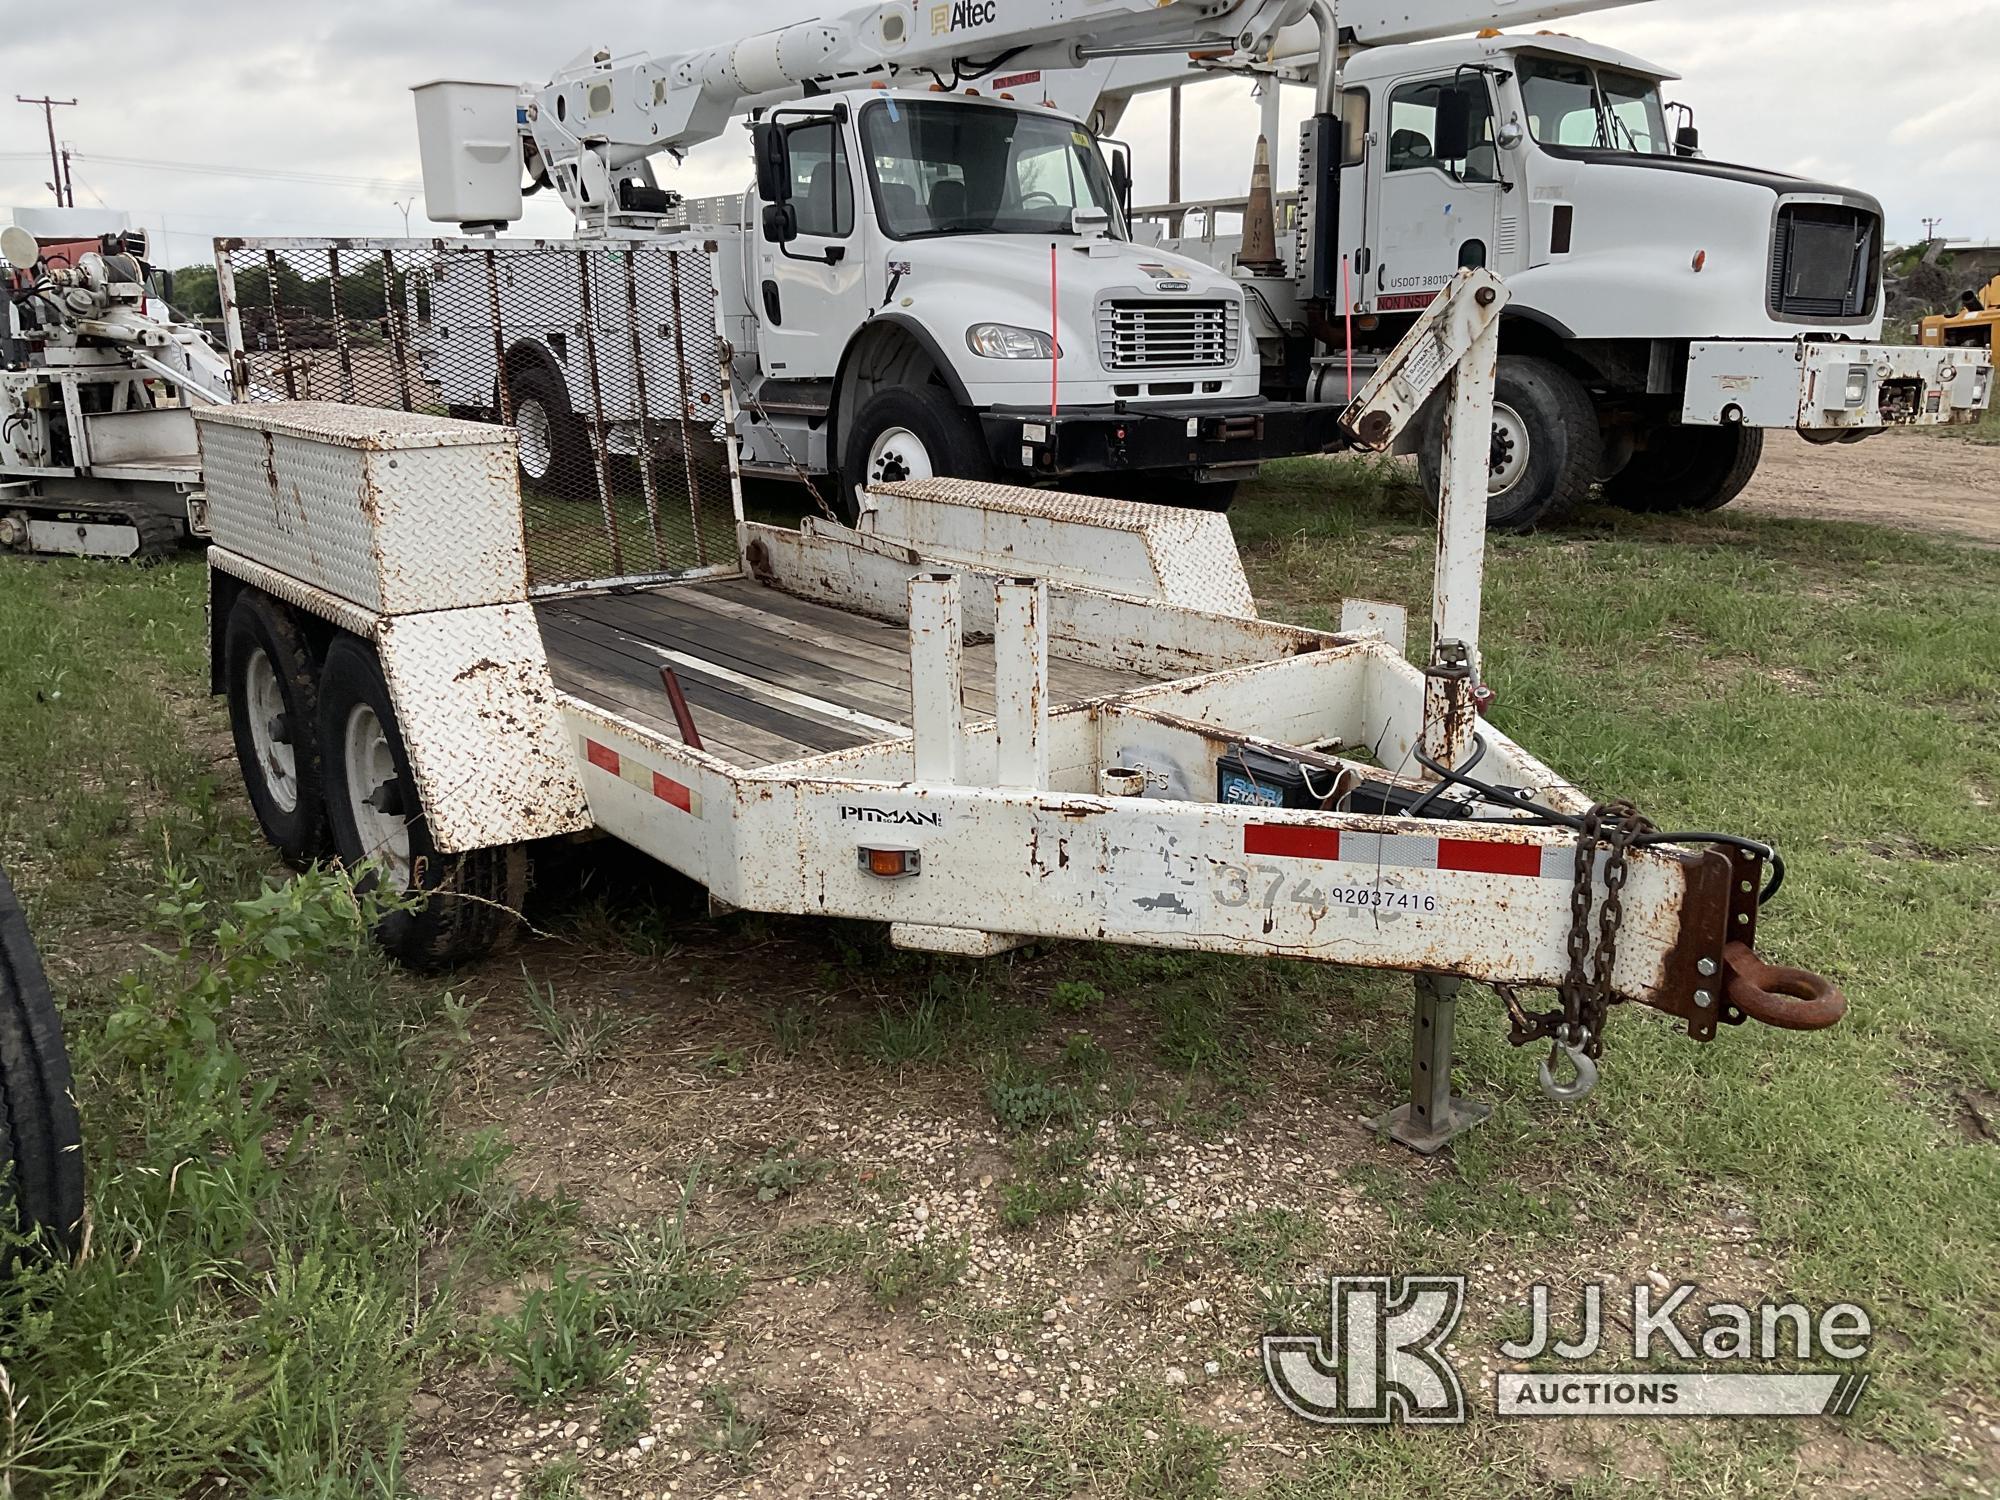 (San Antonio, TX) 2003 Pitman Panther Backyard Digger Derrick, To be sold together with Tandem Axle